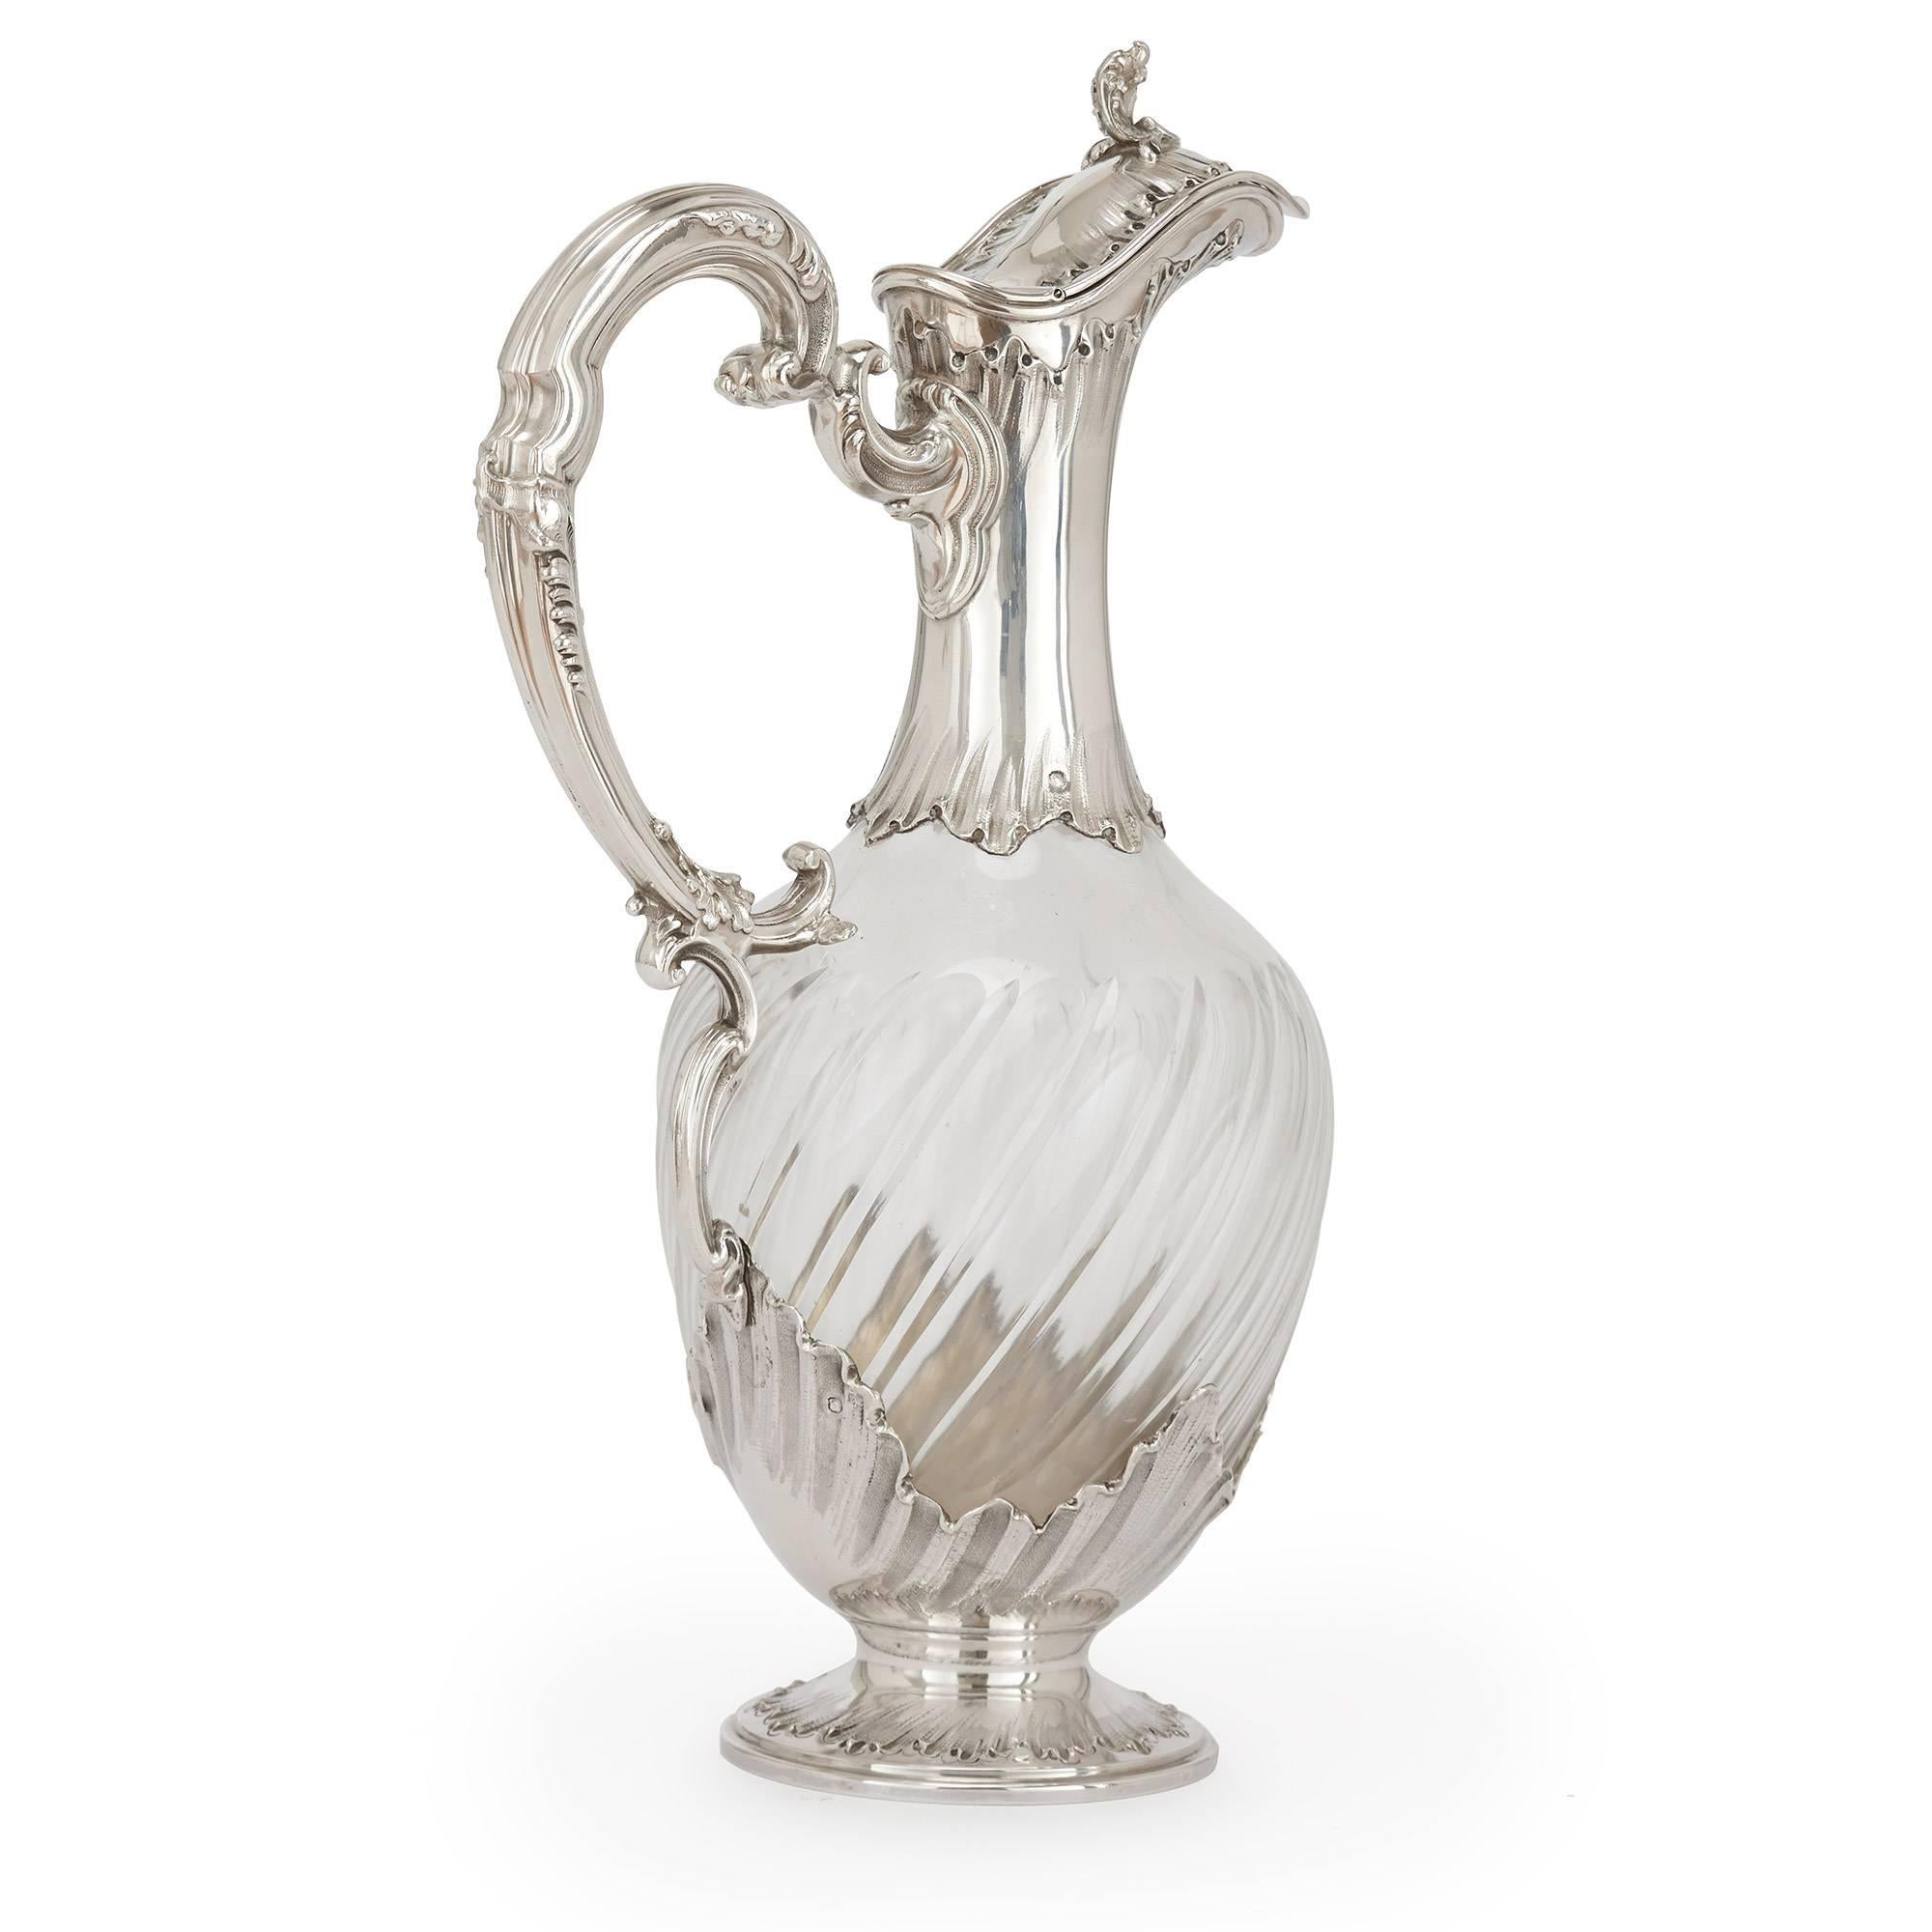 These stunning silver and crystal claret jugs are of typical form, with twisted crystal bodies featuring a fluted decoration and silver necks leading to hinged tops and scrolling handles. The pair are set on circular silver bases, with makers marks